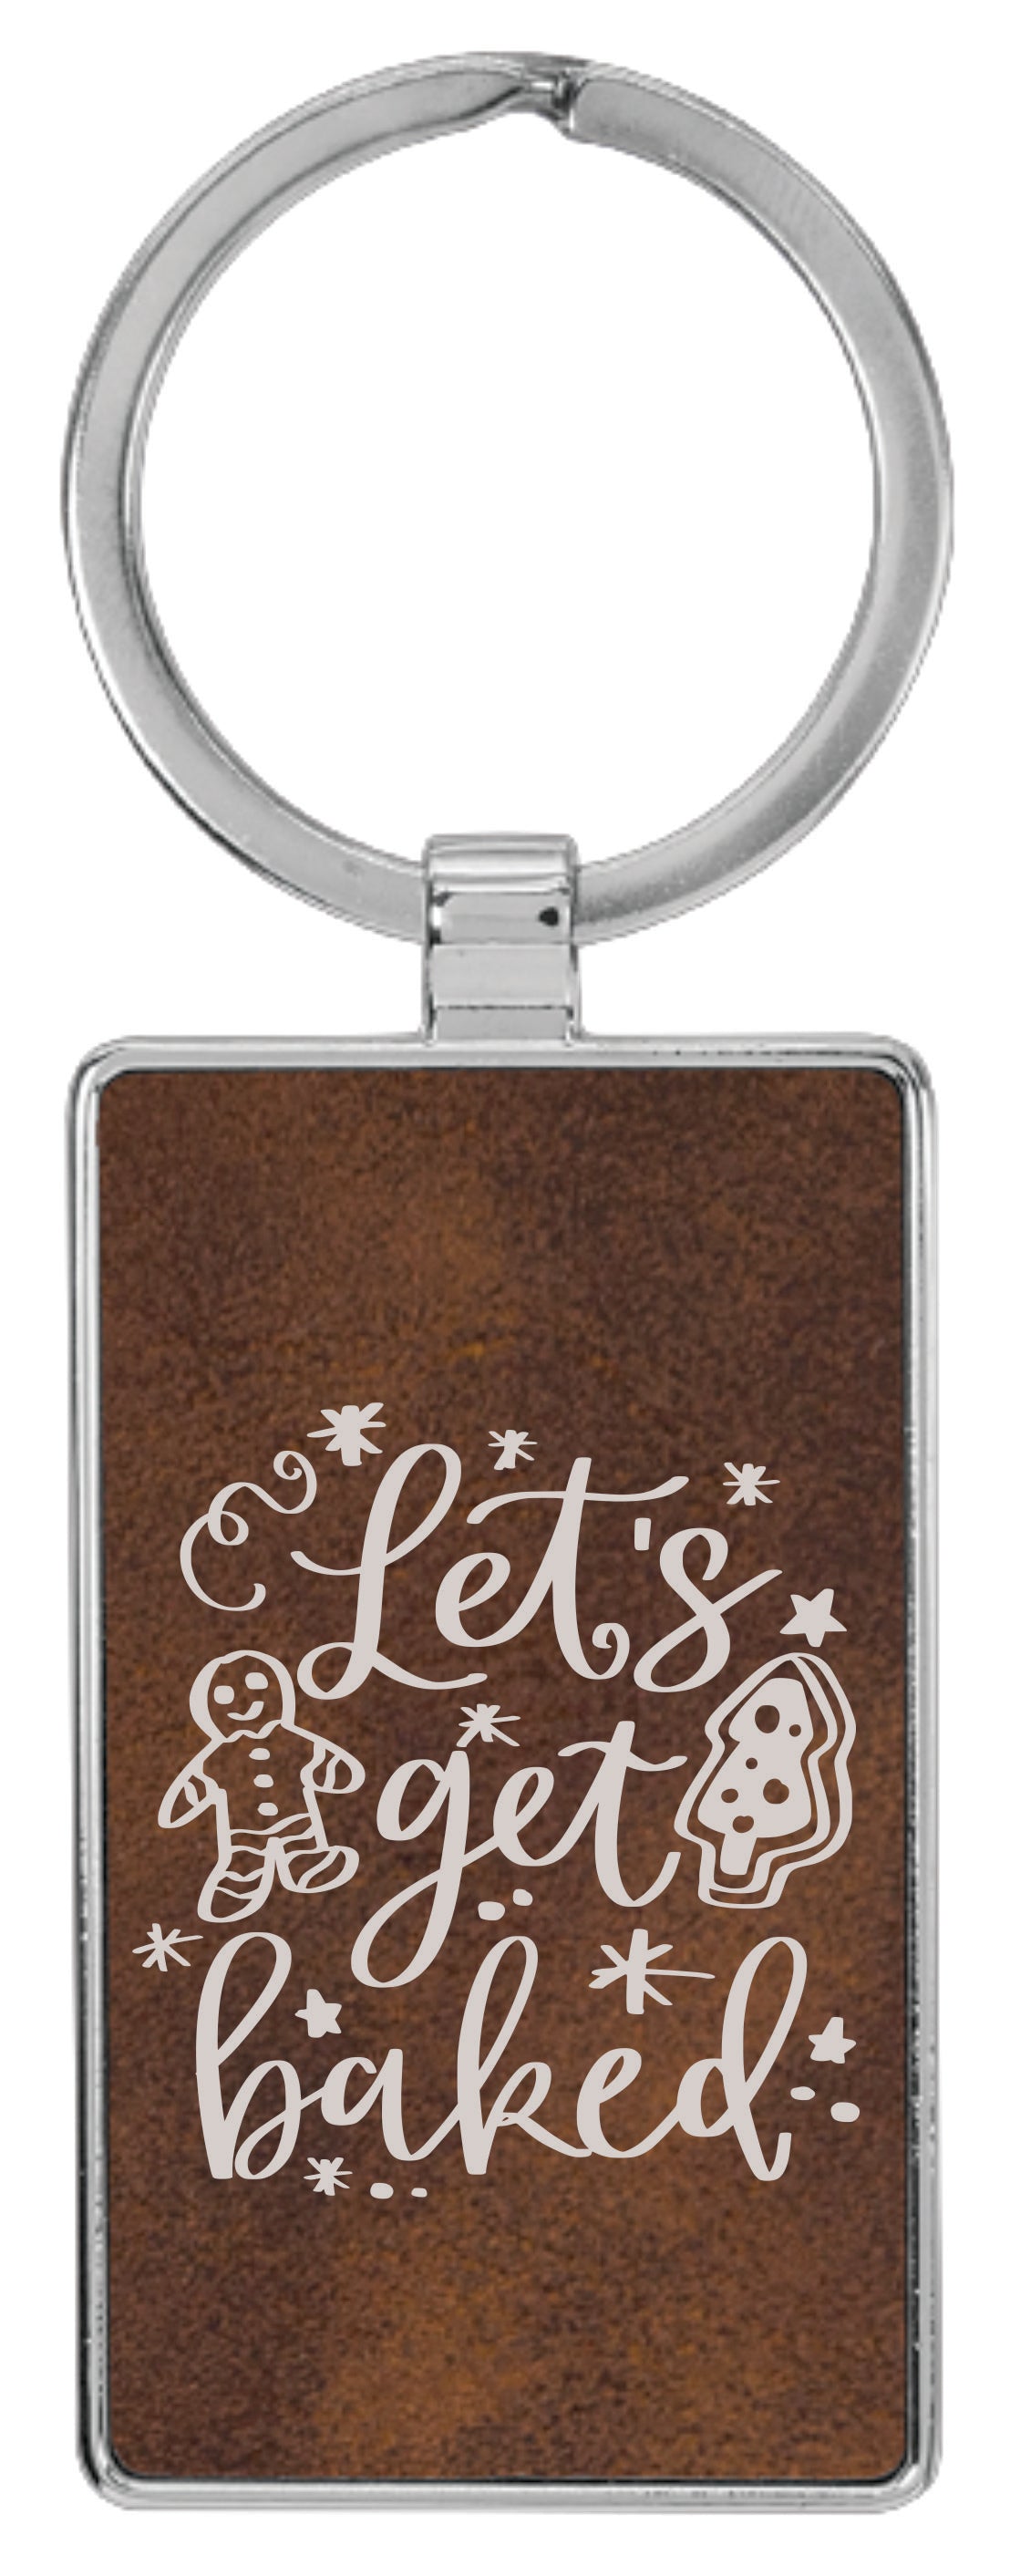 2 3/4" x 1 1/4" Laserable Leatherette/Metal Rustic/Silver Rectangle Keychain